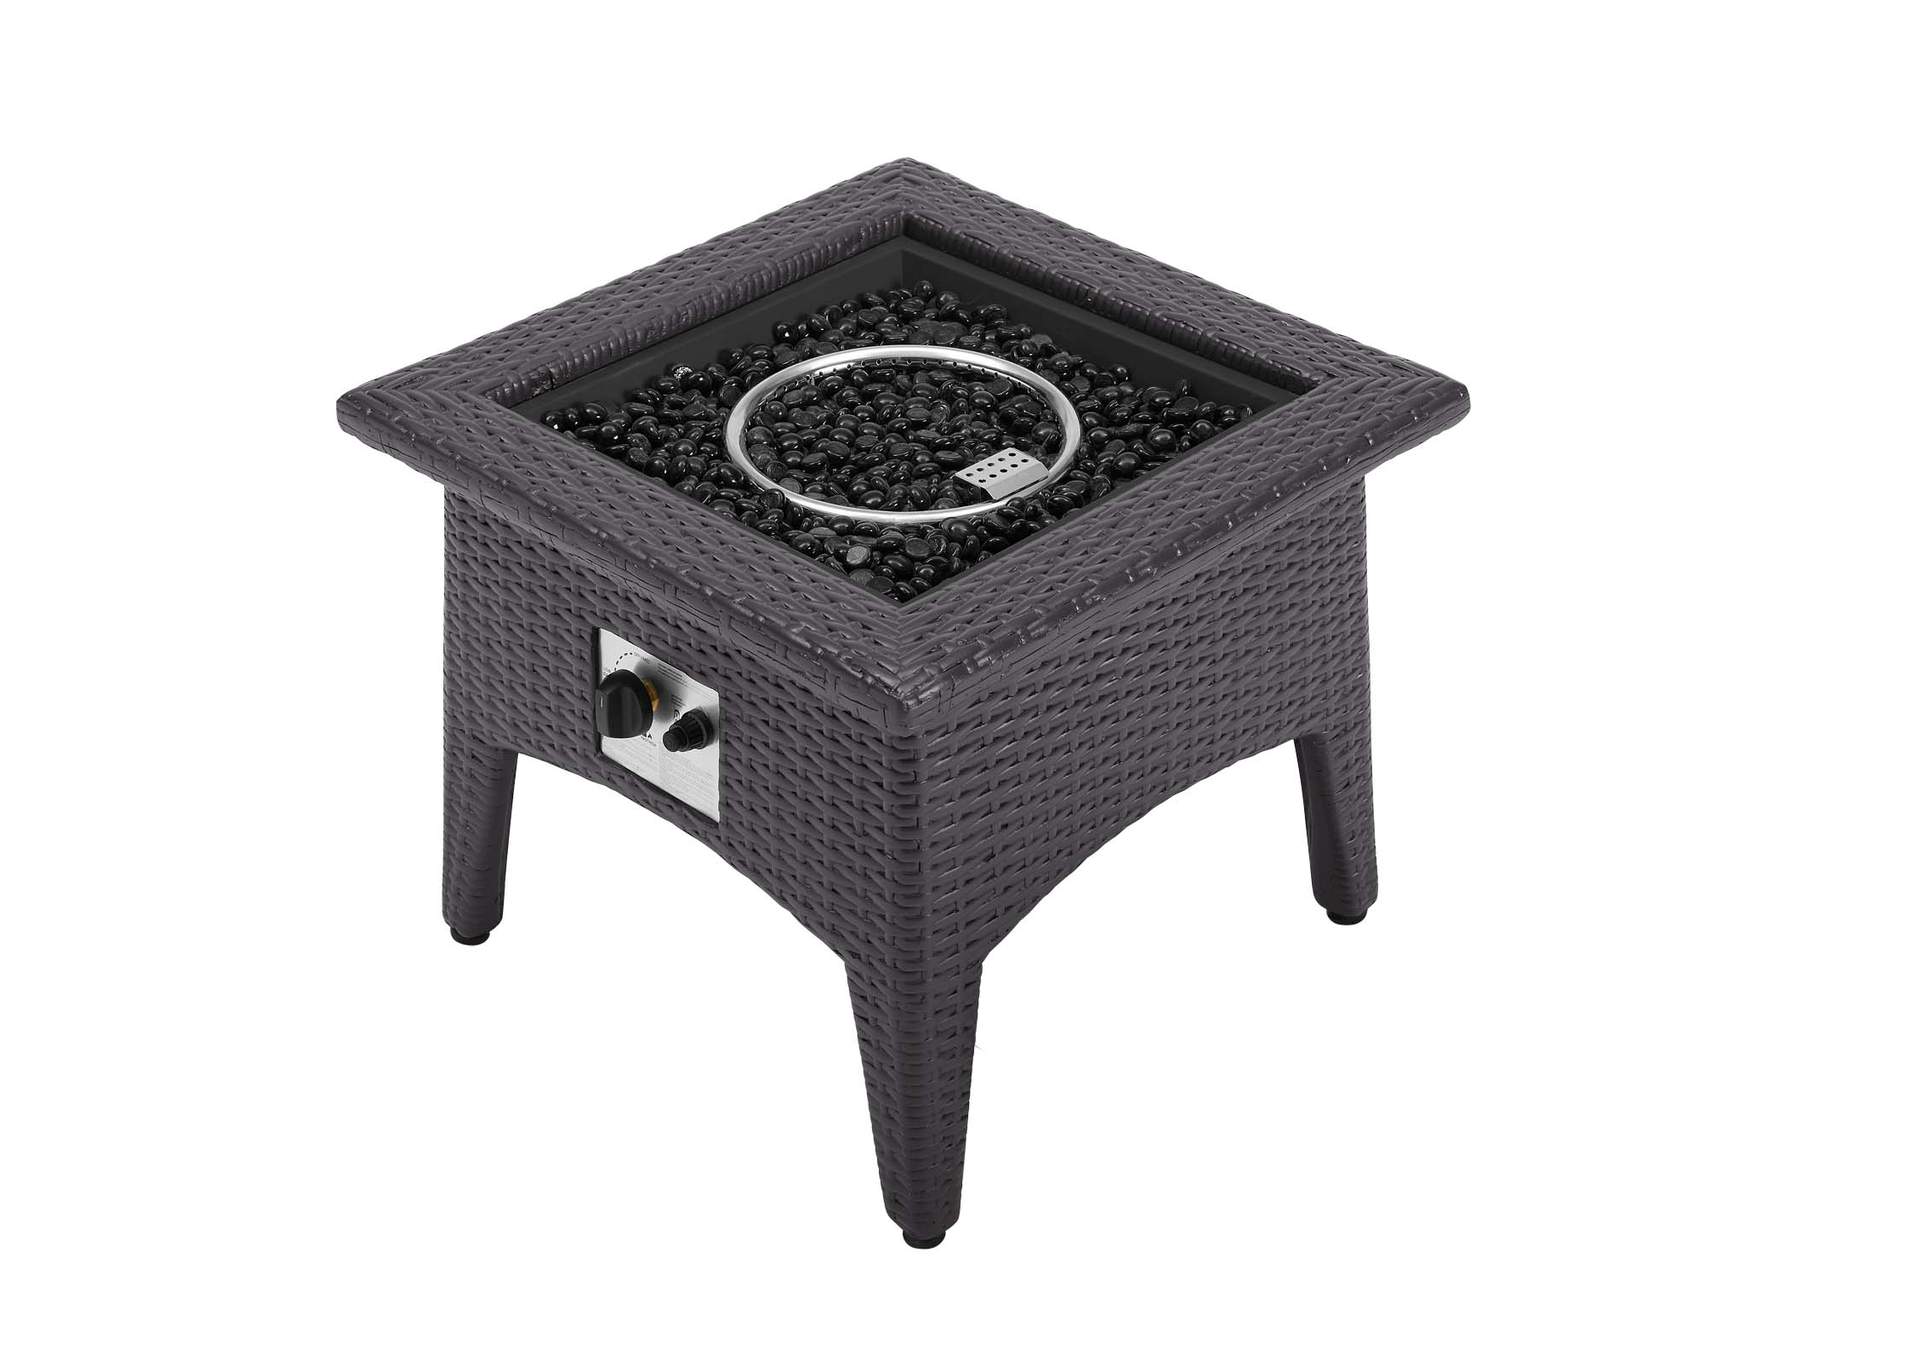 Espresso Turquoise Convene 3 Piece Set Outdoor Patio with Fire Pit,Modway